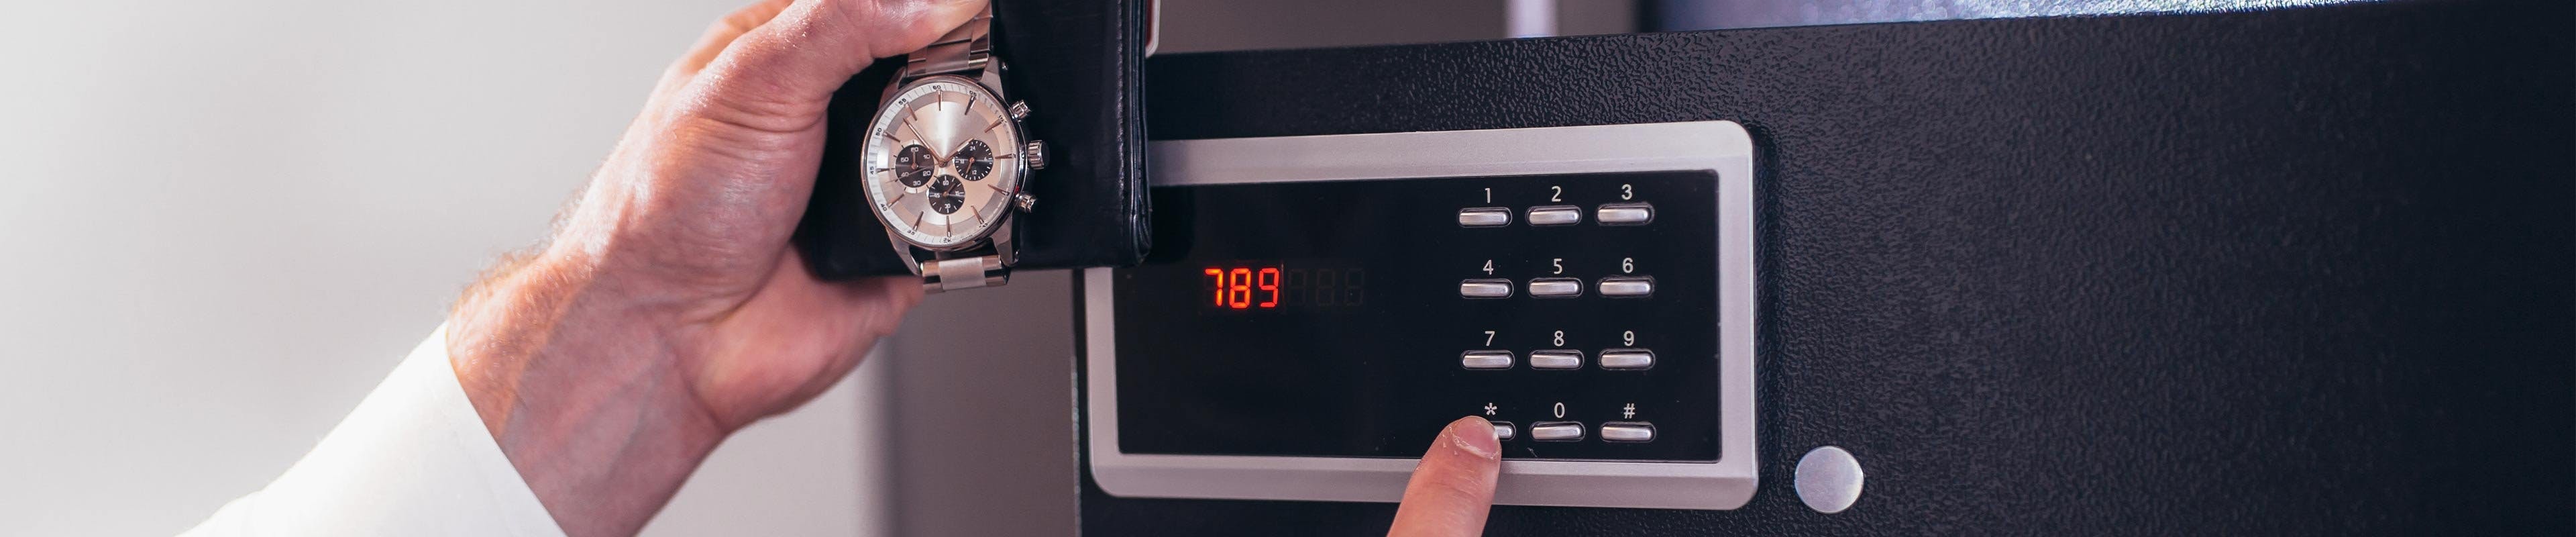 A white man enters a code into a hotel room safe's security panel while holding his expensive watch and wallet.